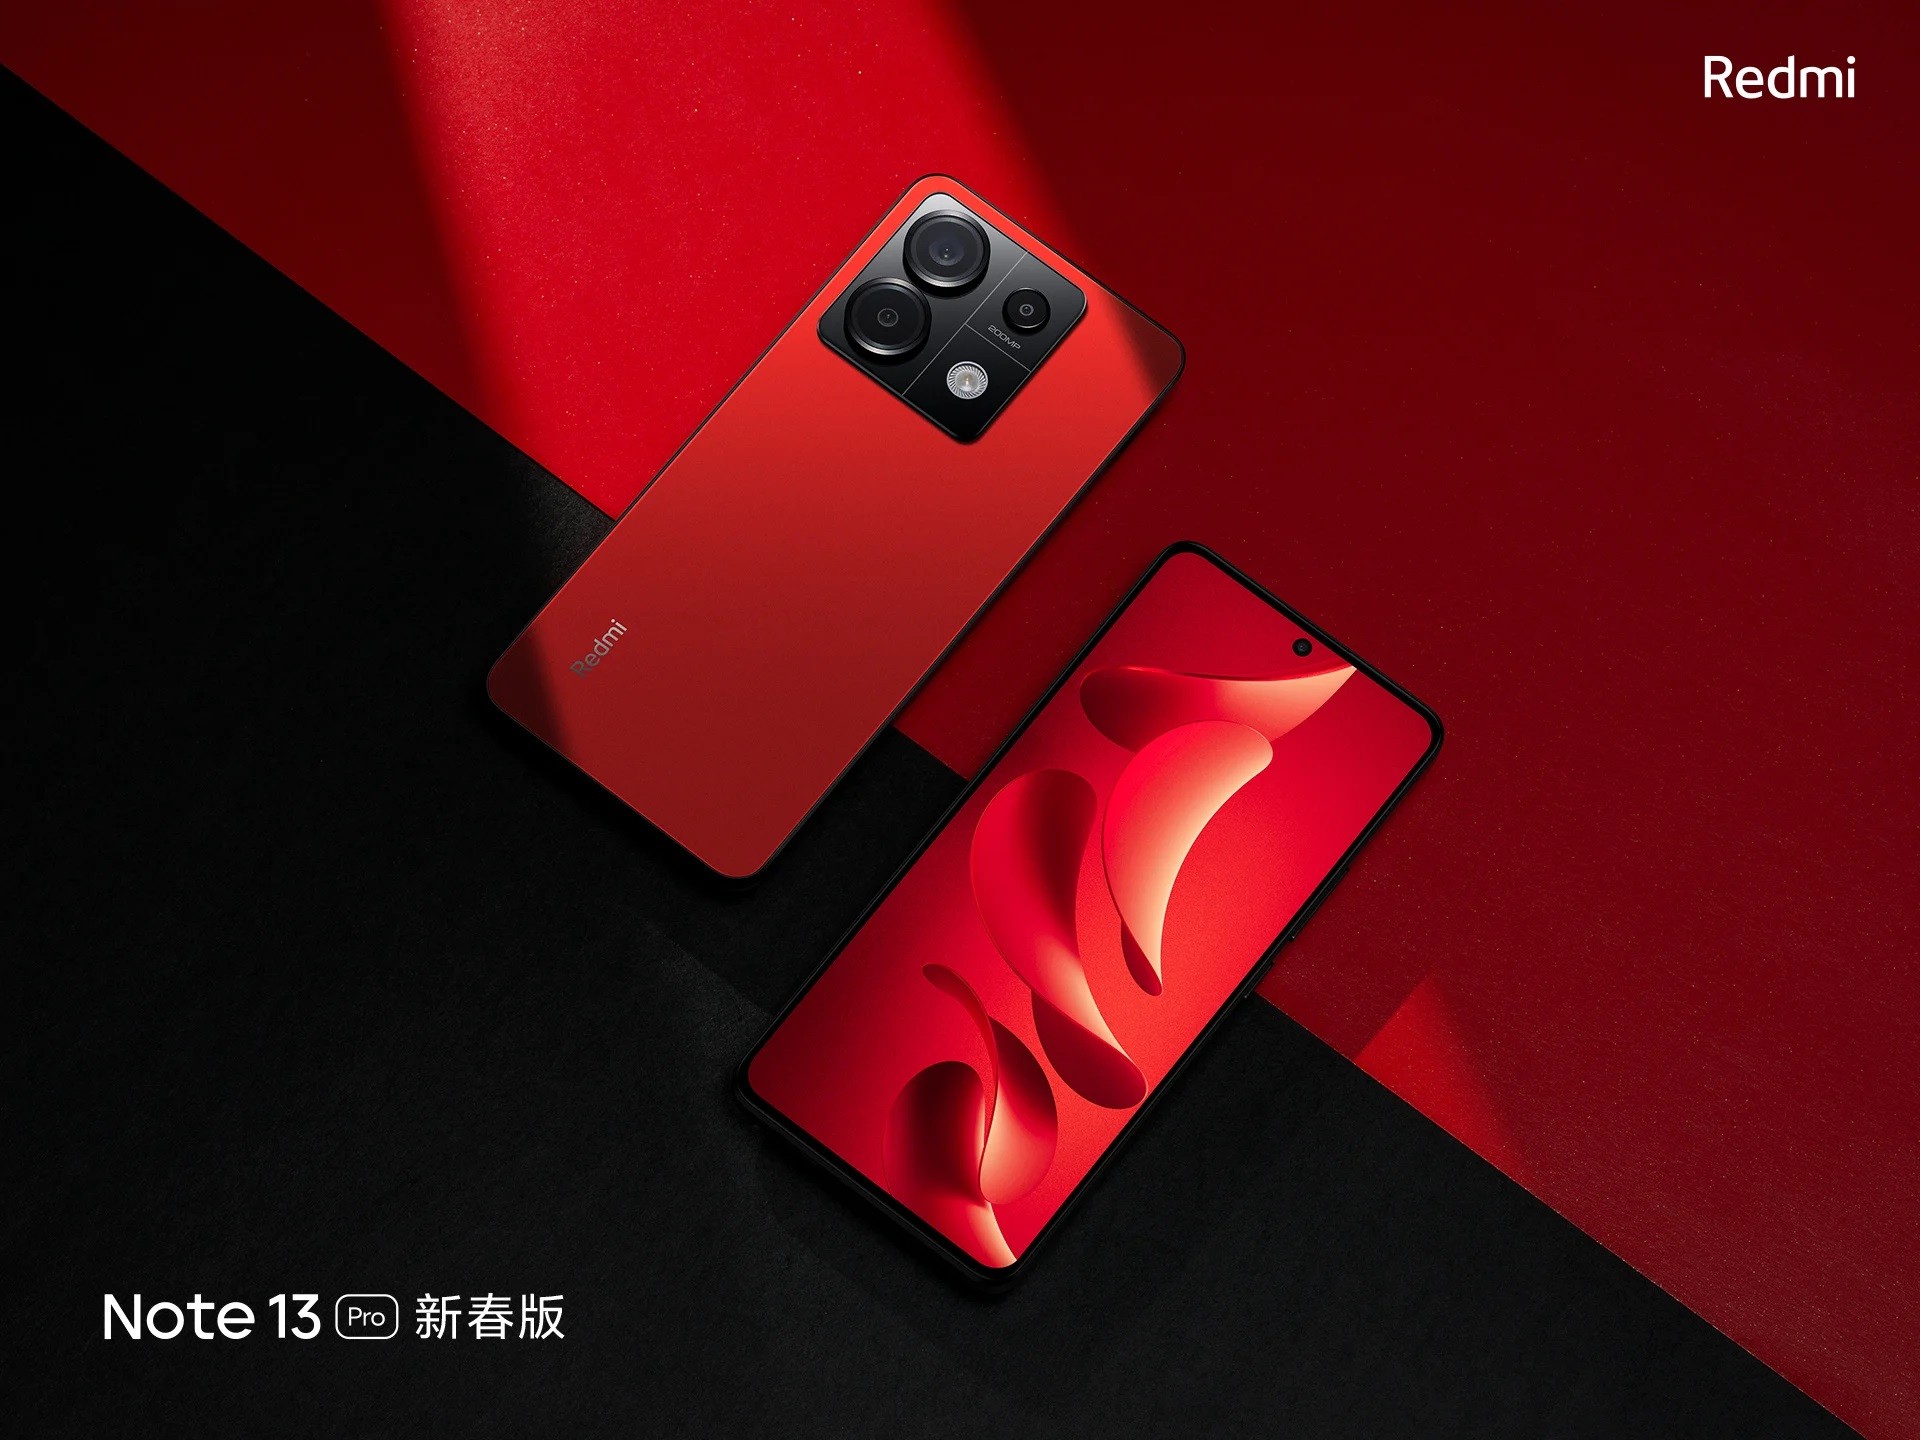 redmi-note-13-pro-new-year-special-3-1706171552.jpg